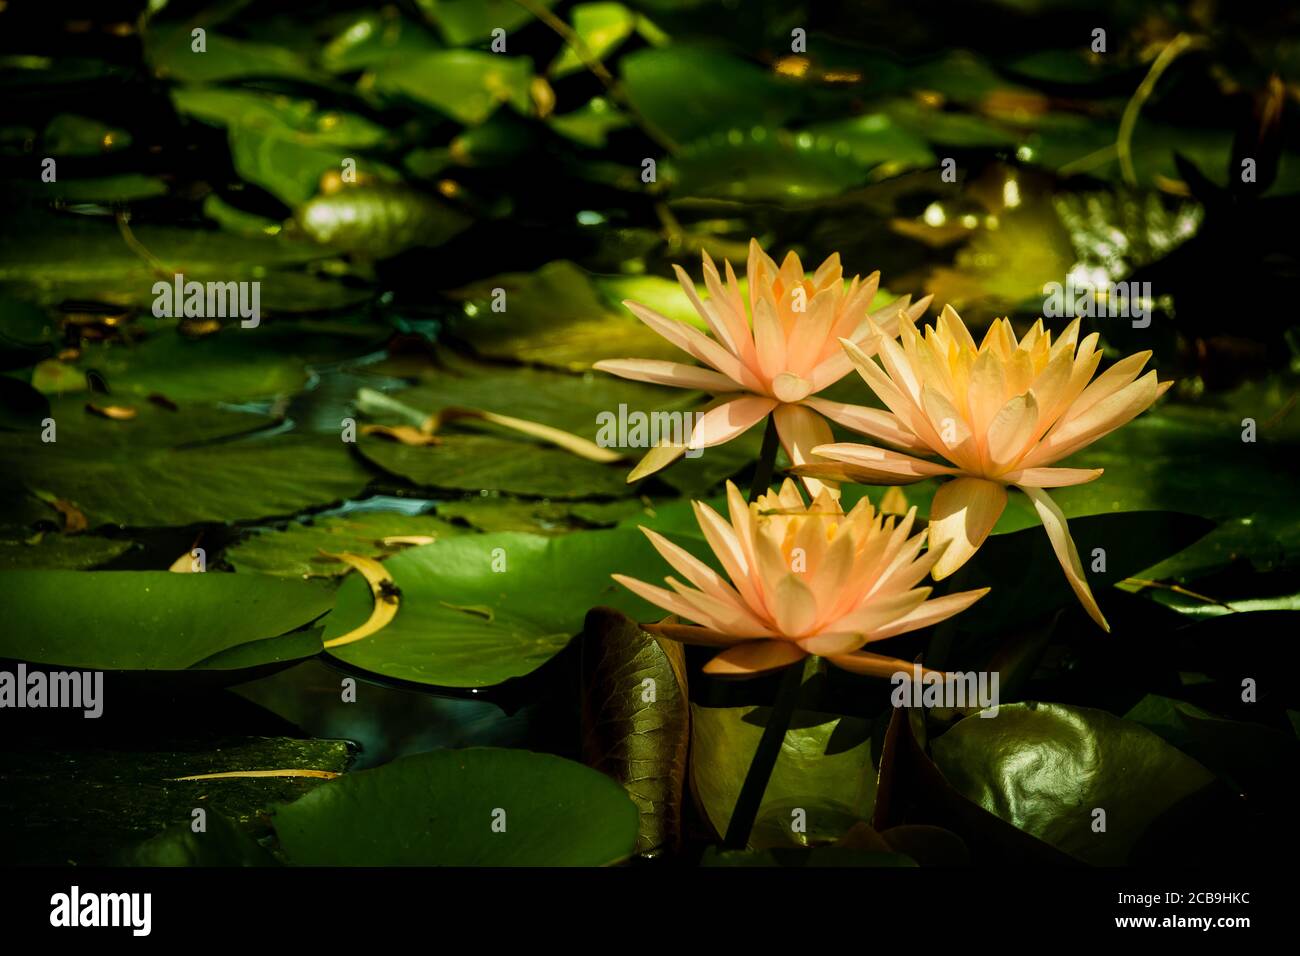 Golden Yellow color bunch of lotus flower in a pond Stock Photo